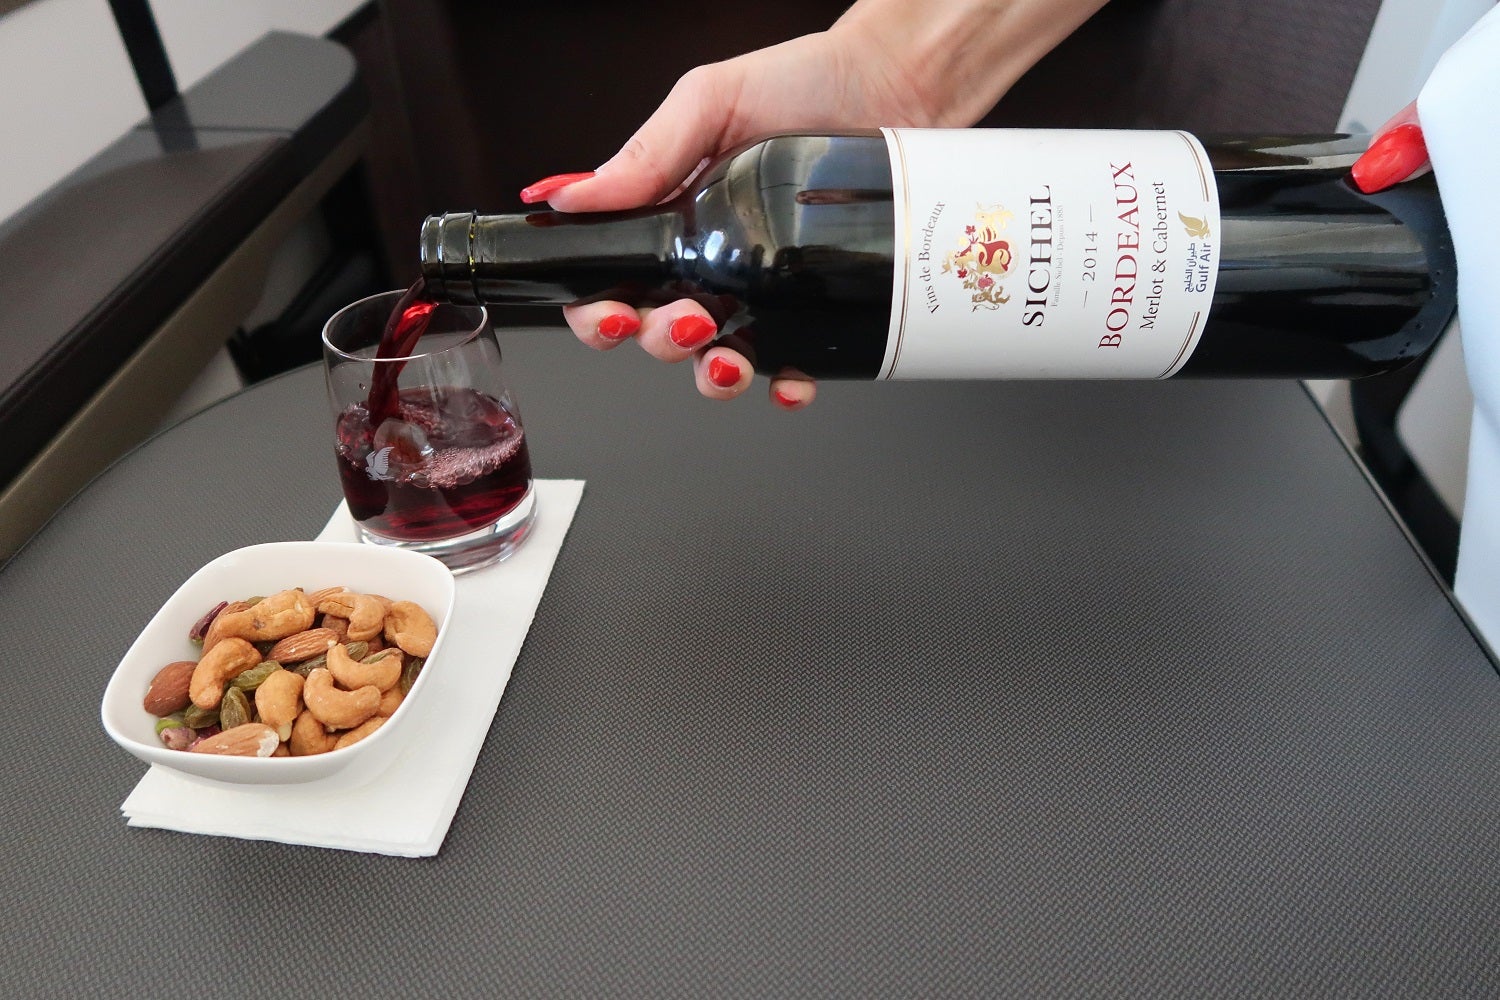 Gulf Air 787-9 LHR-BAH business class wine and nuts